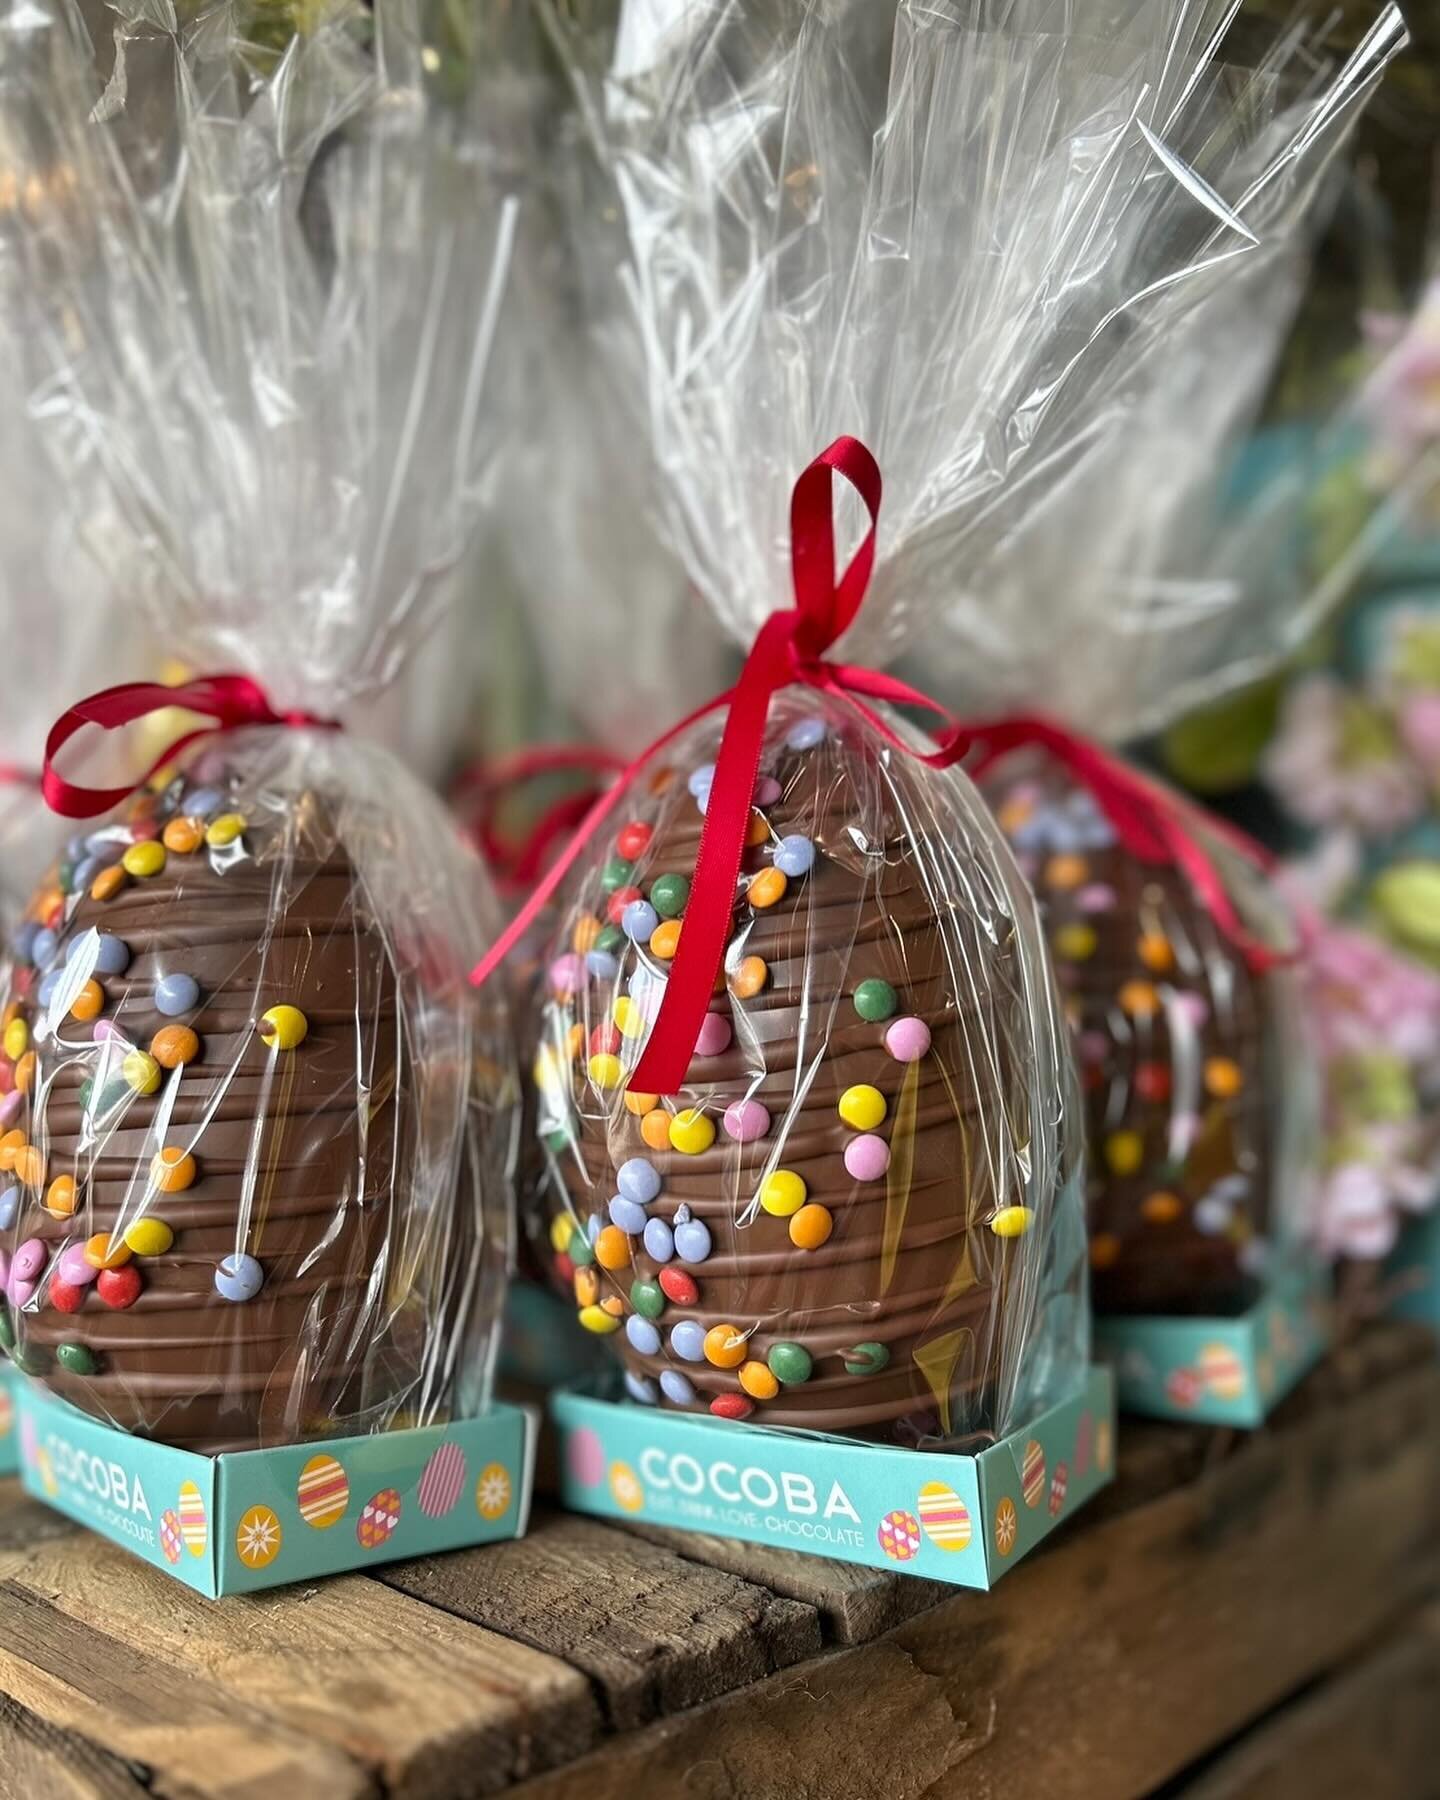 With Easter just around the corner, we are excited to showcase our delicious Easter food today at our tasting day.🐣

From chocolatey Easter eggs and the prettiest flowers to Mouth-watering Easter cakes, our farm shop displays are oozing with Easter 